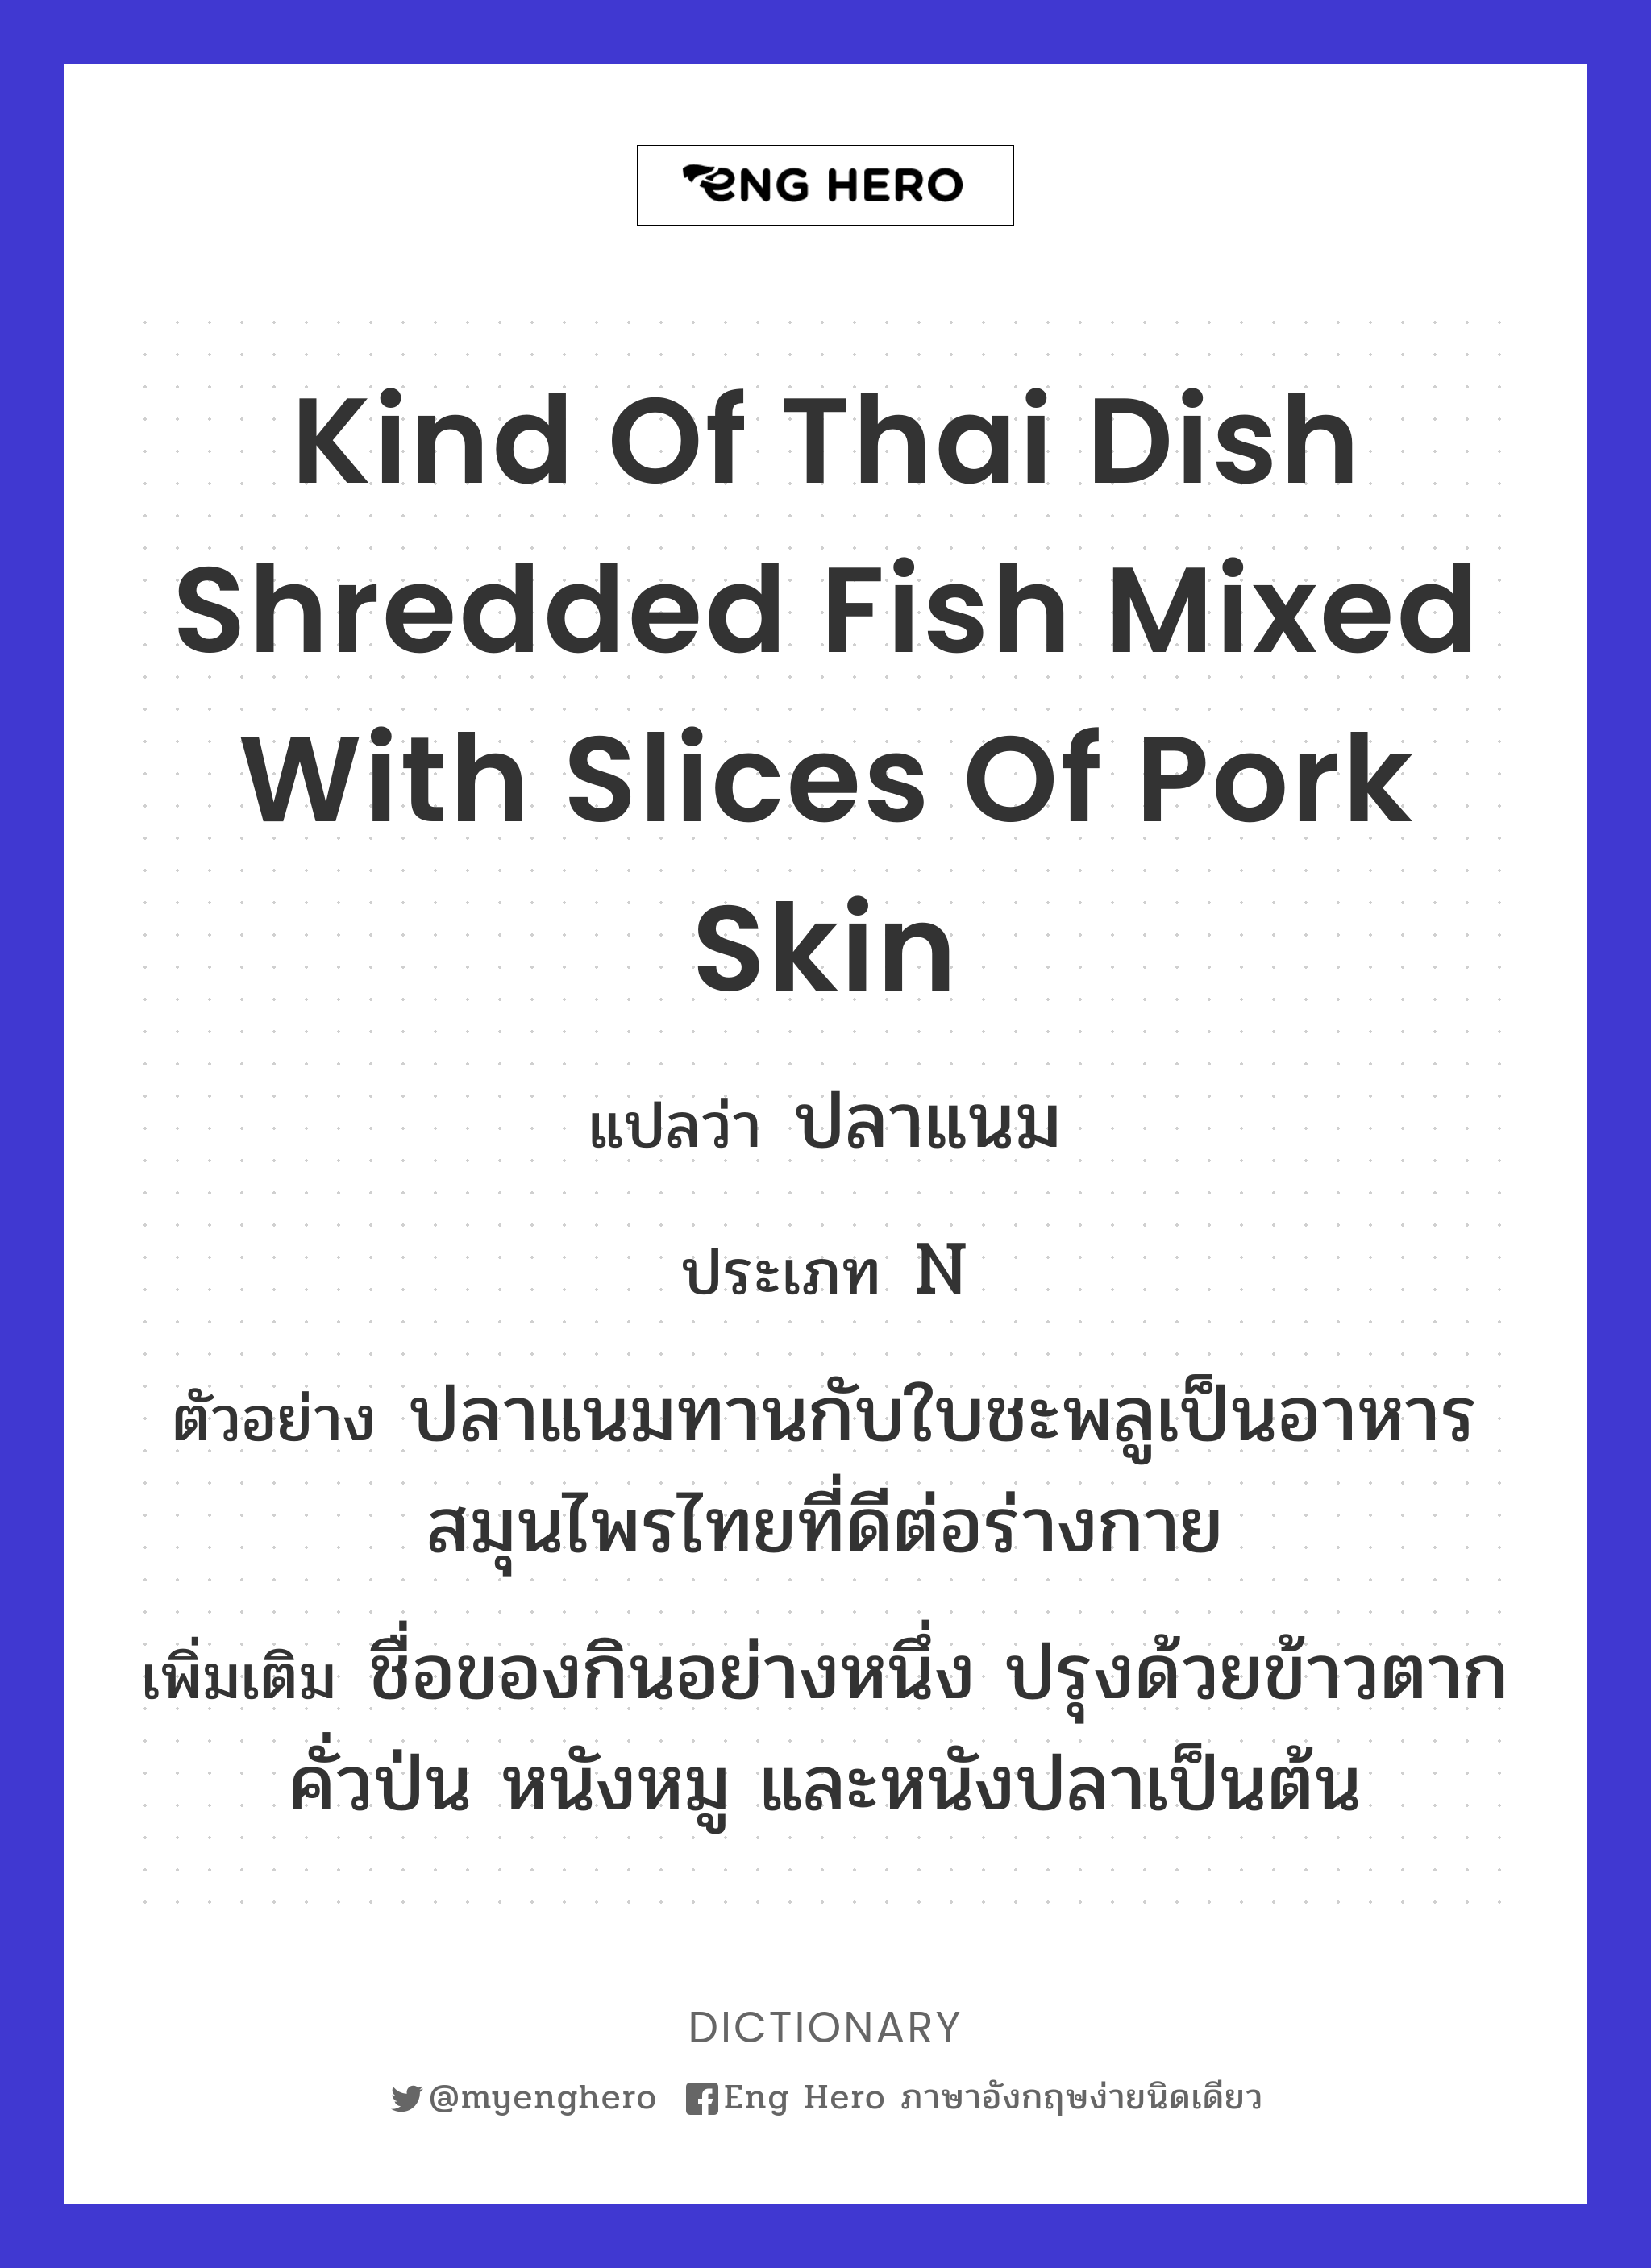 kind of Thai dish shredded fish mixed with slices of pork skin